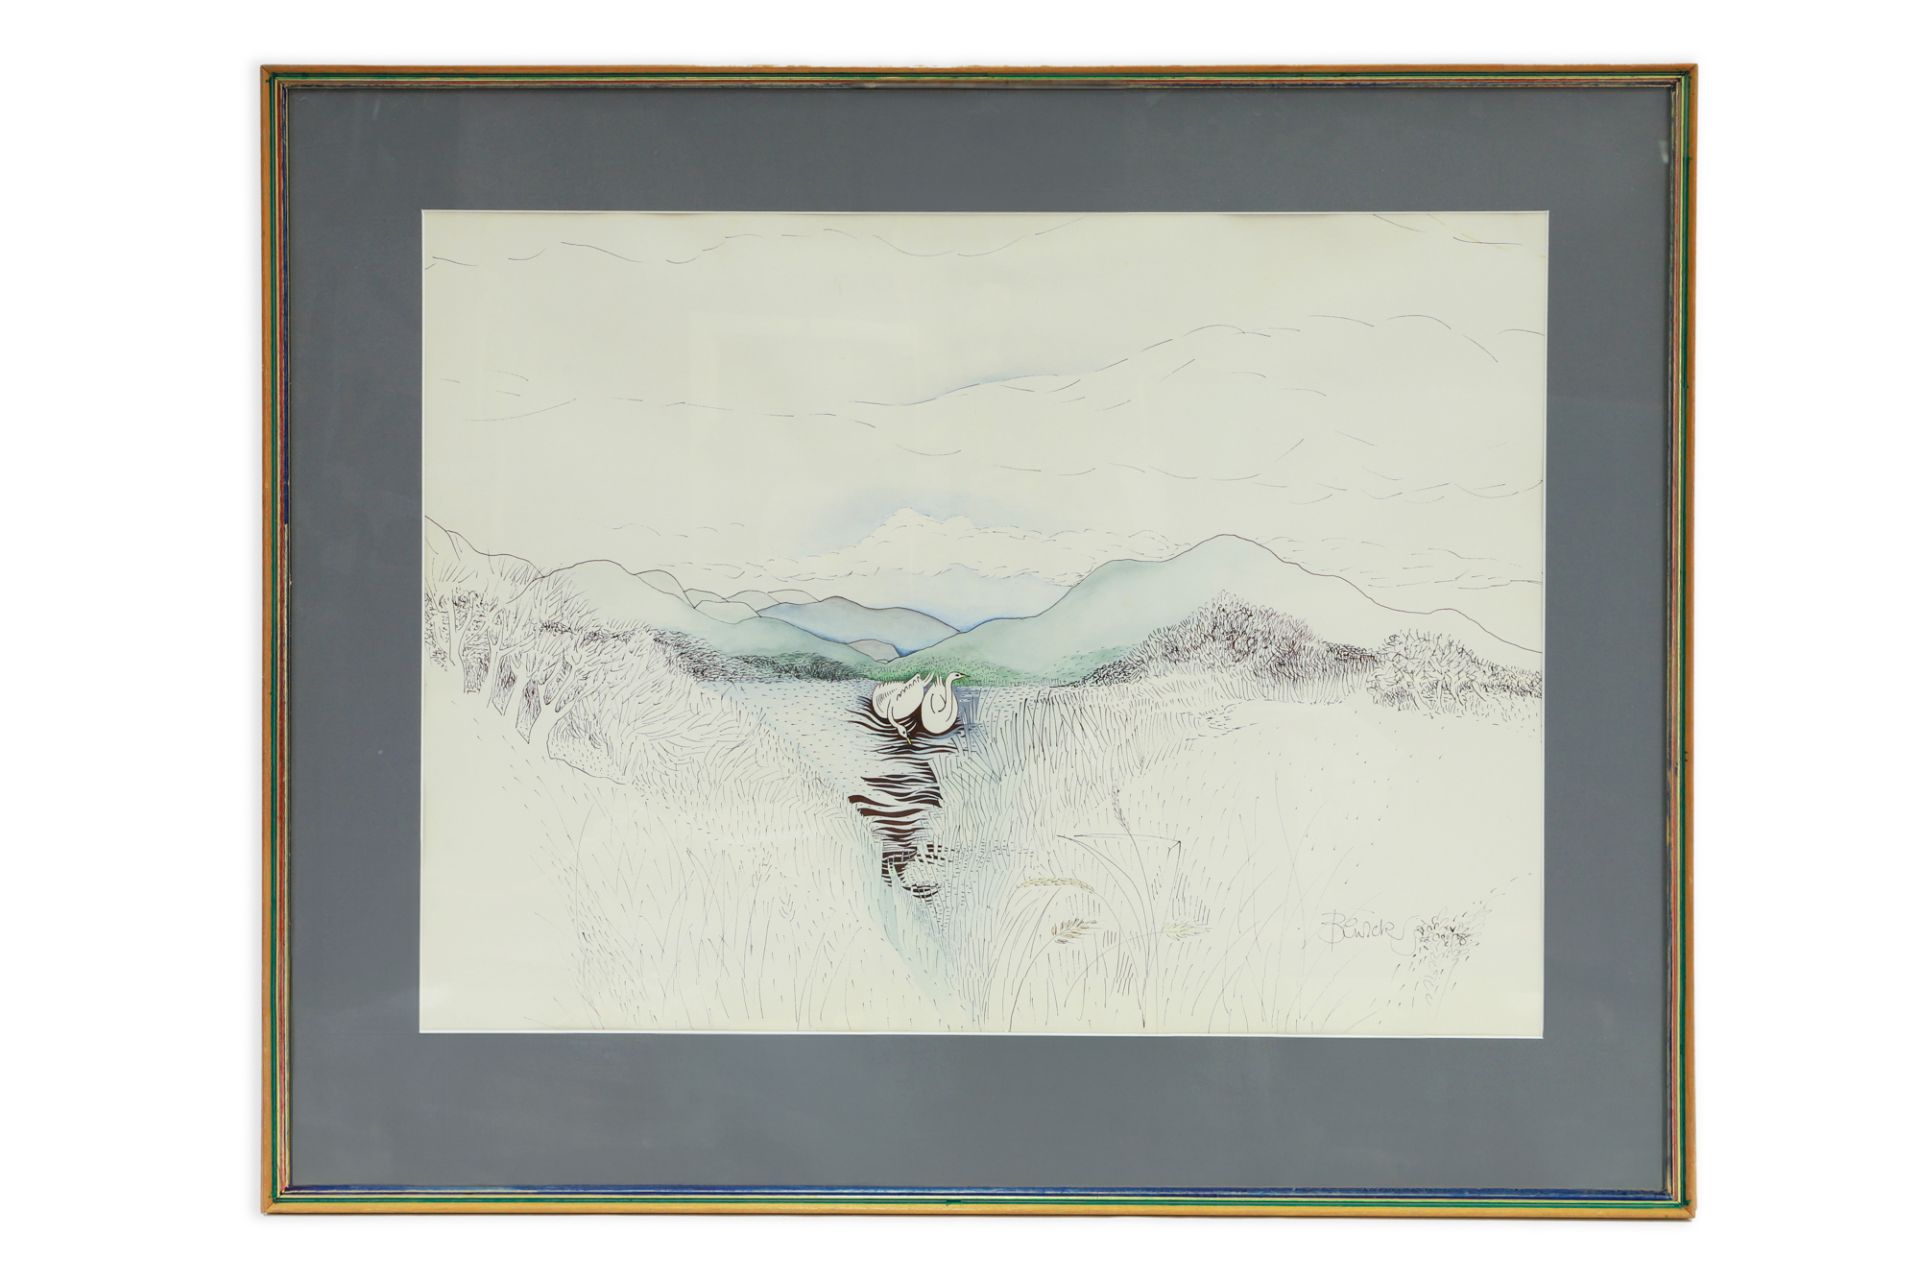 PAULINE BEWICK RHA, ( ) "Swans, Killarney" water colour and pen, signed & dated, '89, 37.5 x 30.5"